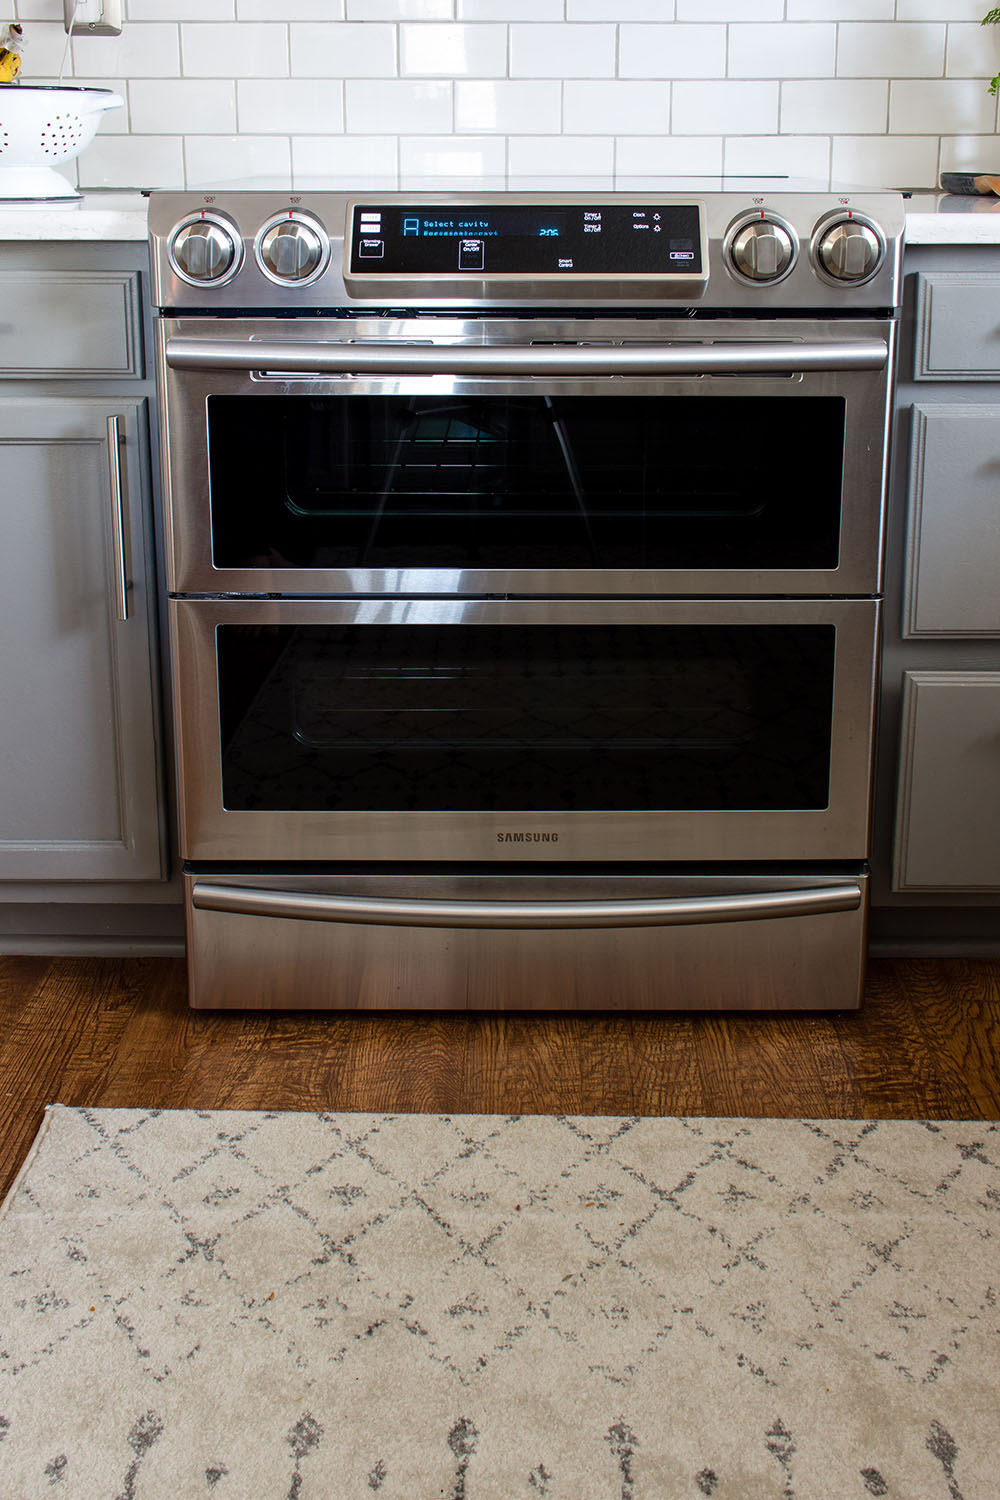 A Samsung double oven slide-in range in stainless steel.